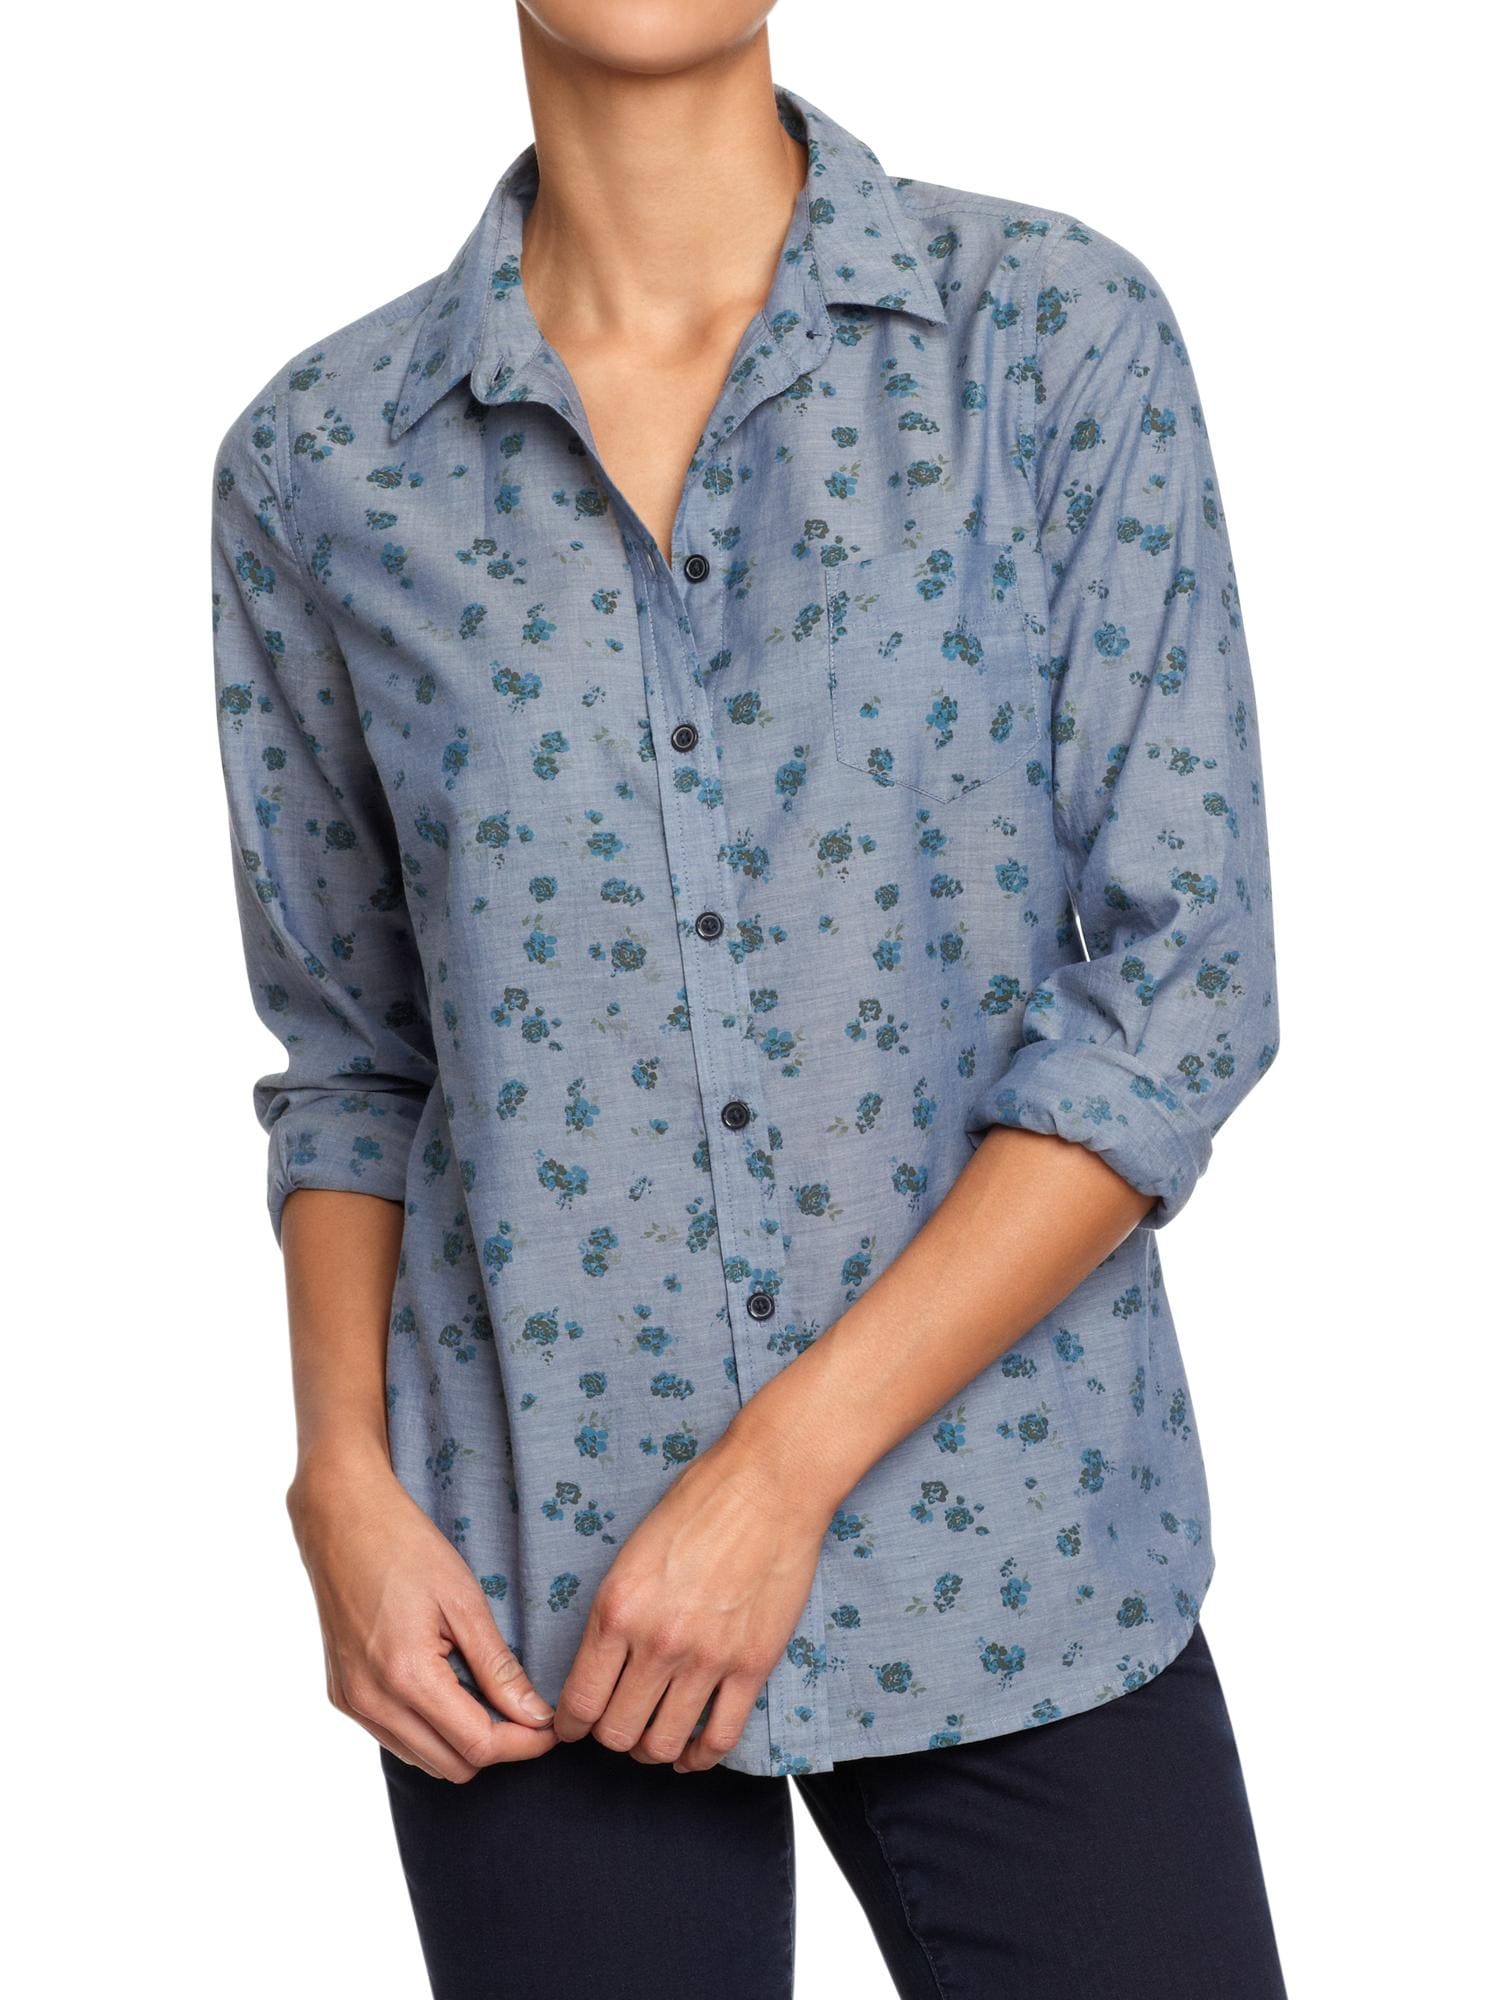 Women's Lightweight Patterned Shirts | Old Navy